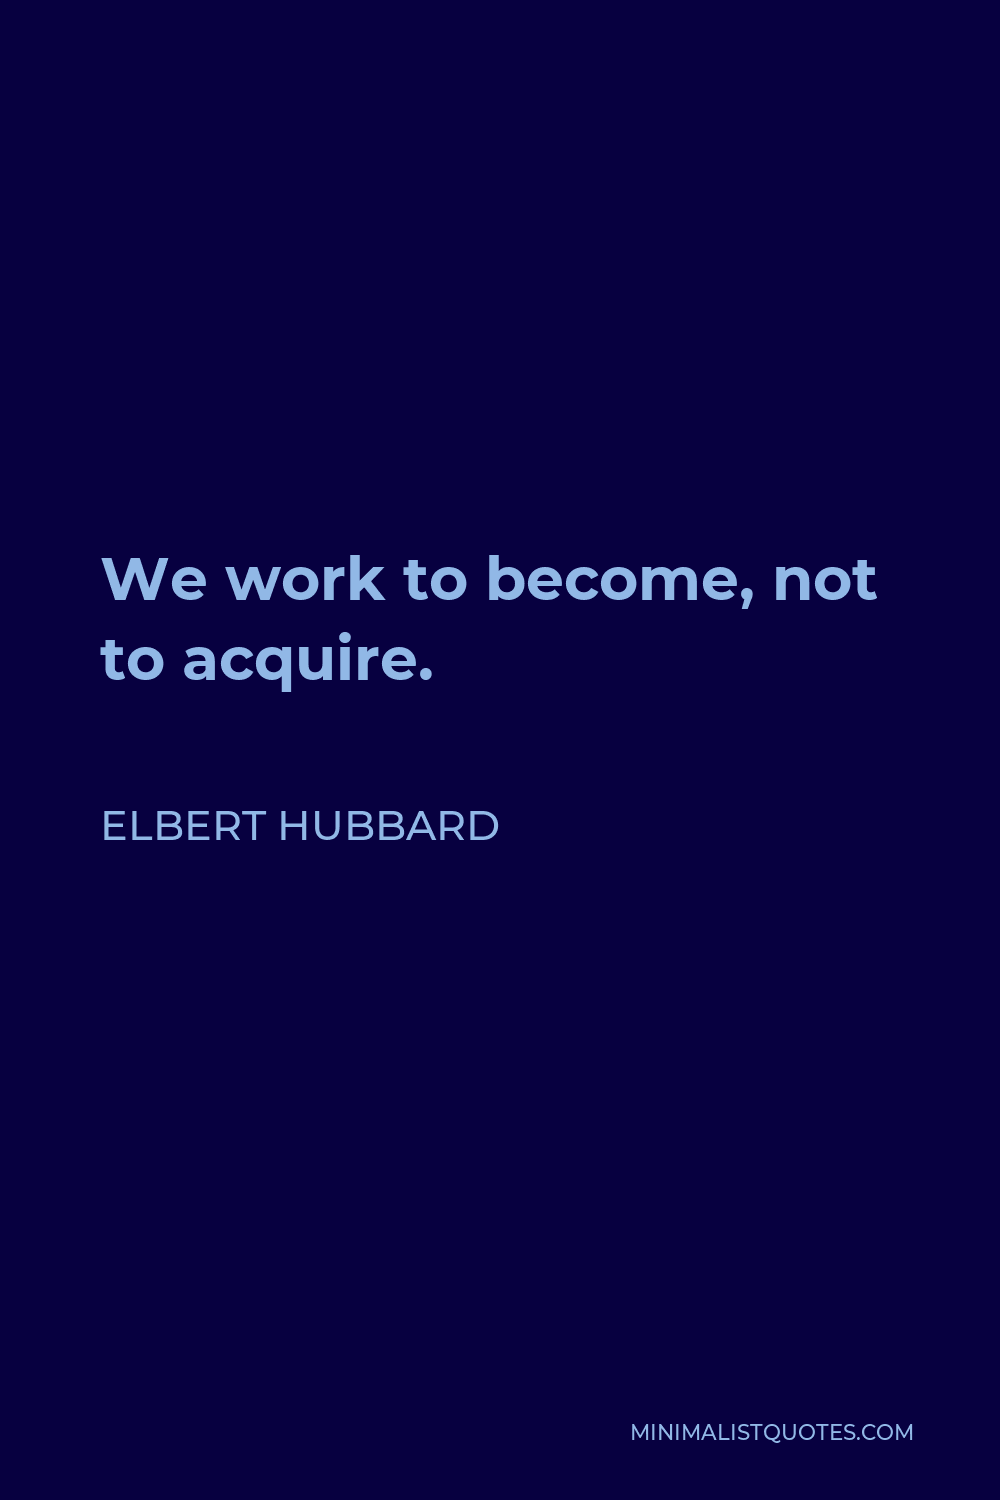 Elbert Hubbard Quote - We work to become, not to acquire.